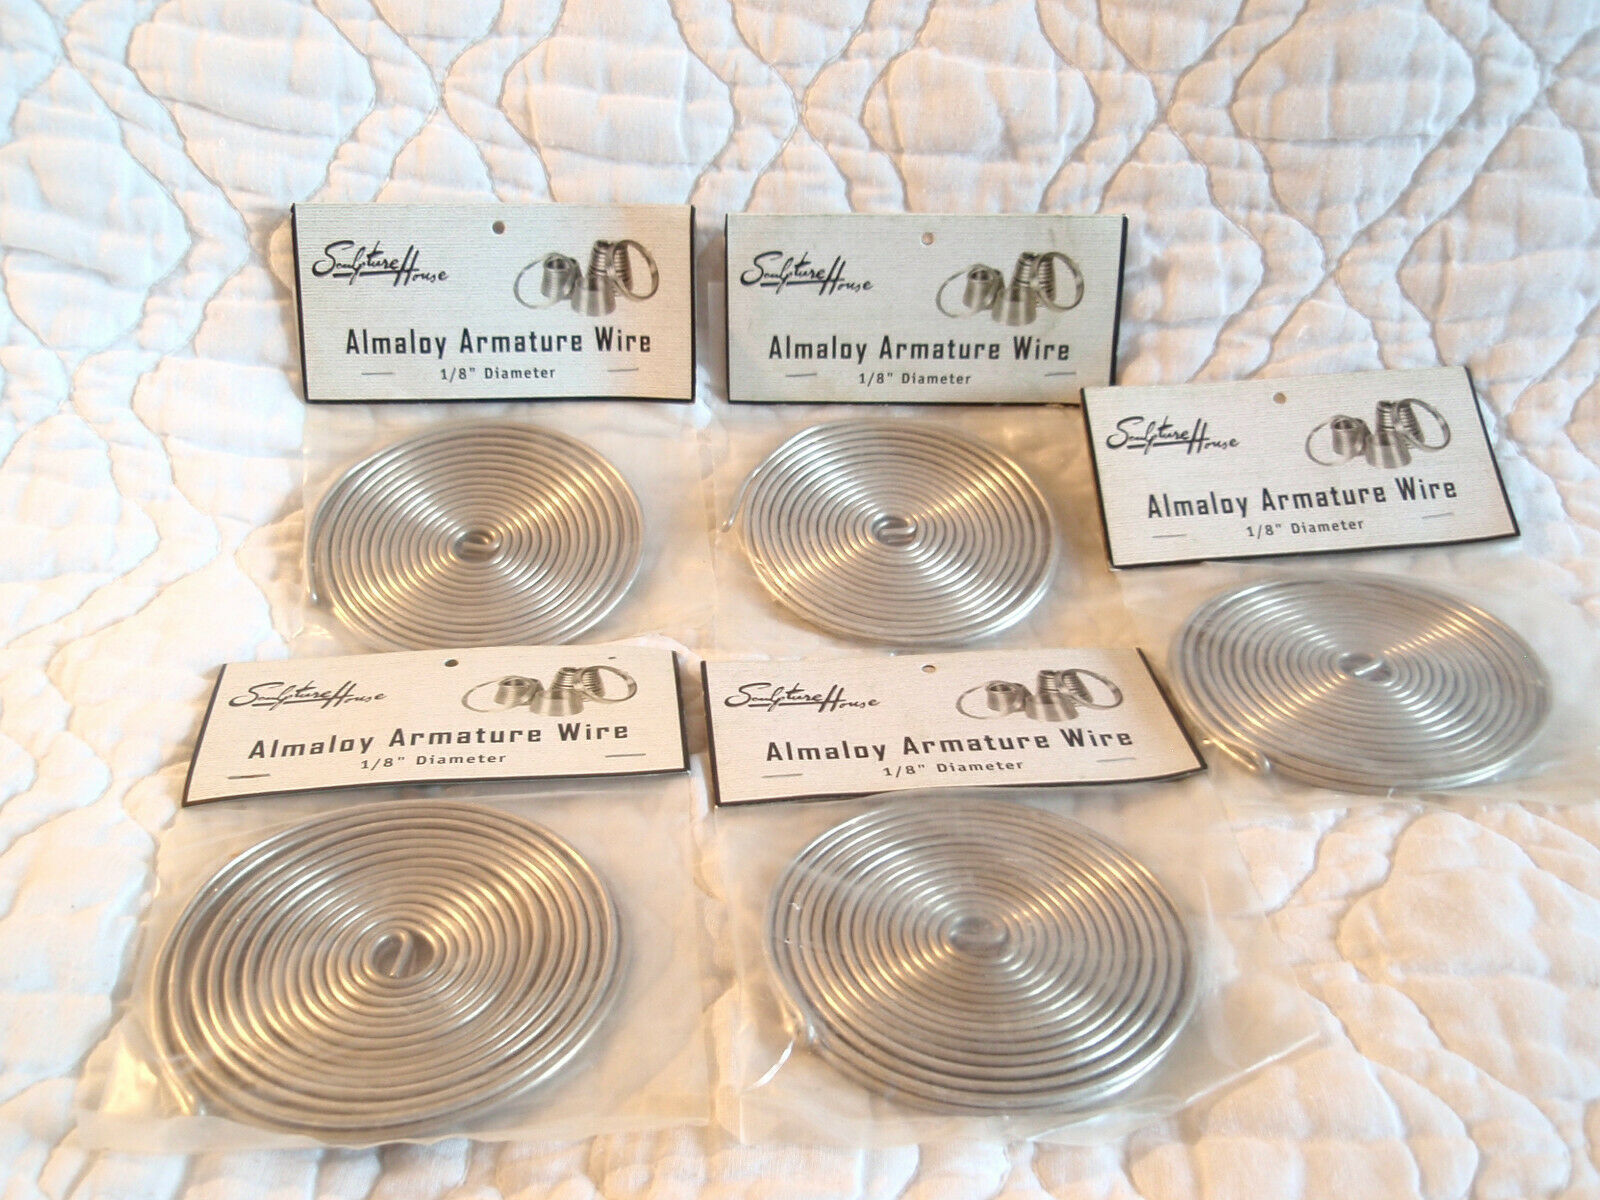 Sculpture House Almaloy Armature Wire 1/8" 20 Feet Long Lot Of 5 New Arts Crafts